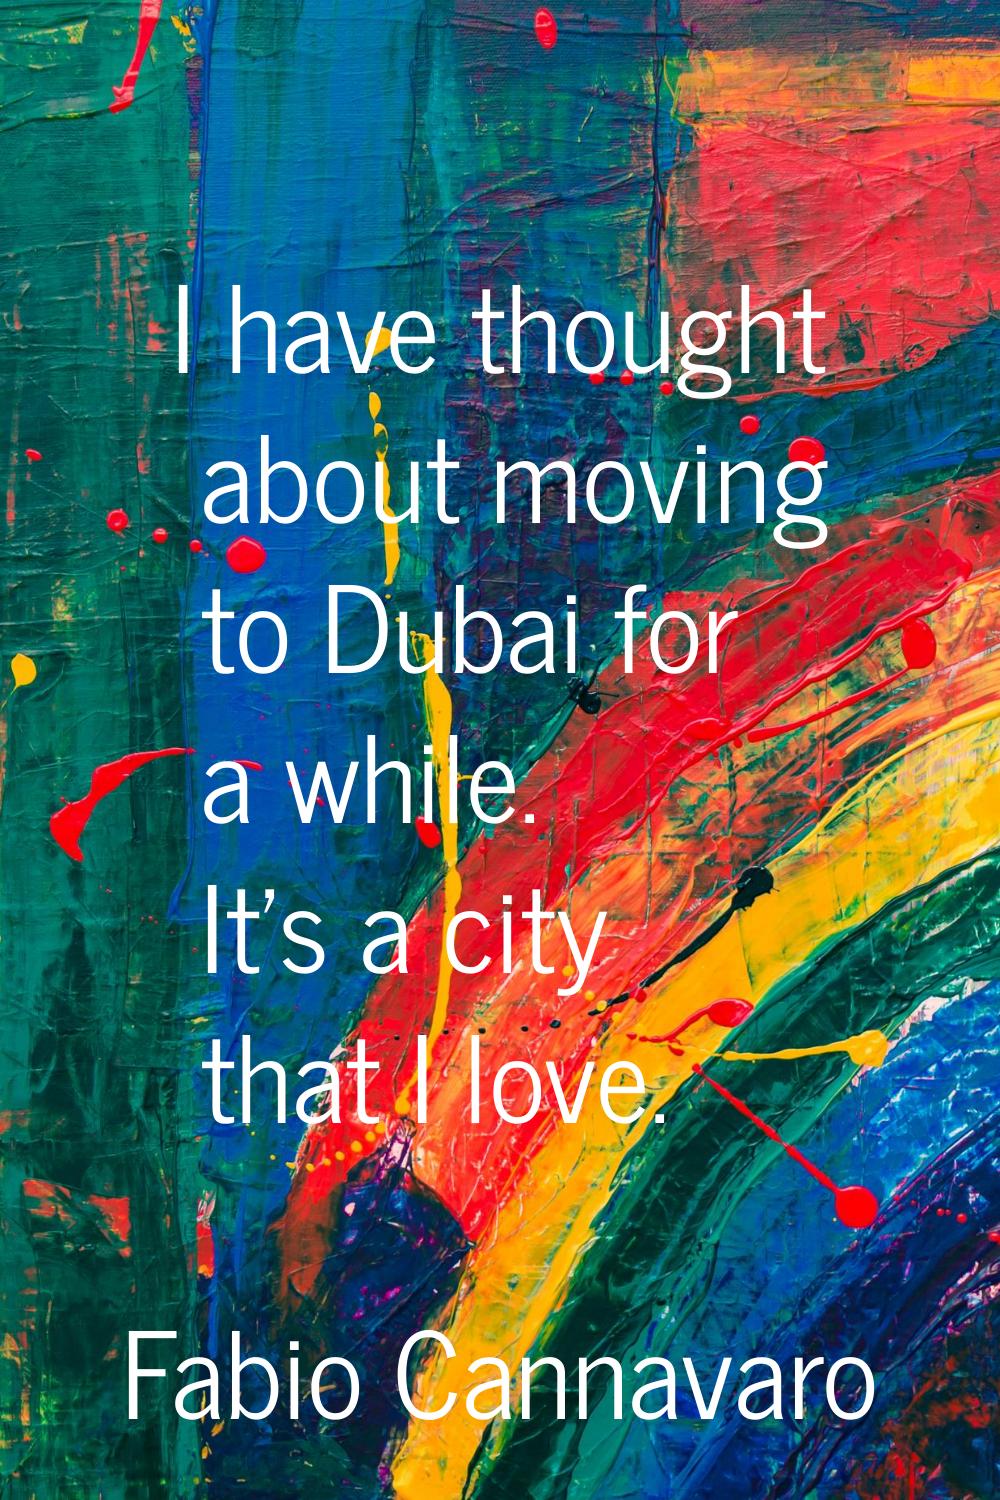 I have thought about moving to Dubai for a while. It's a city that I love.